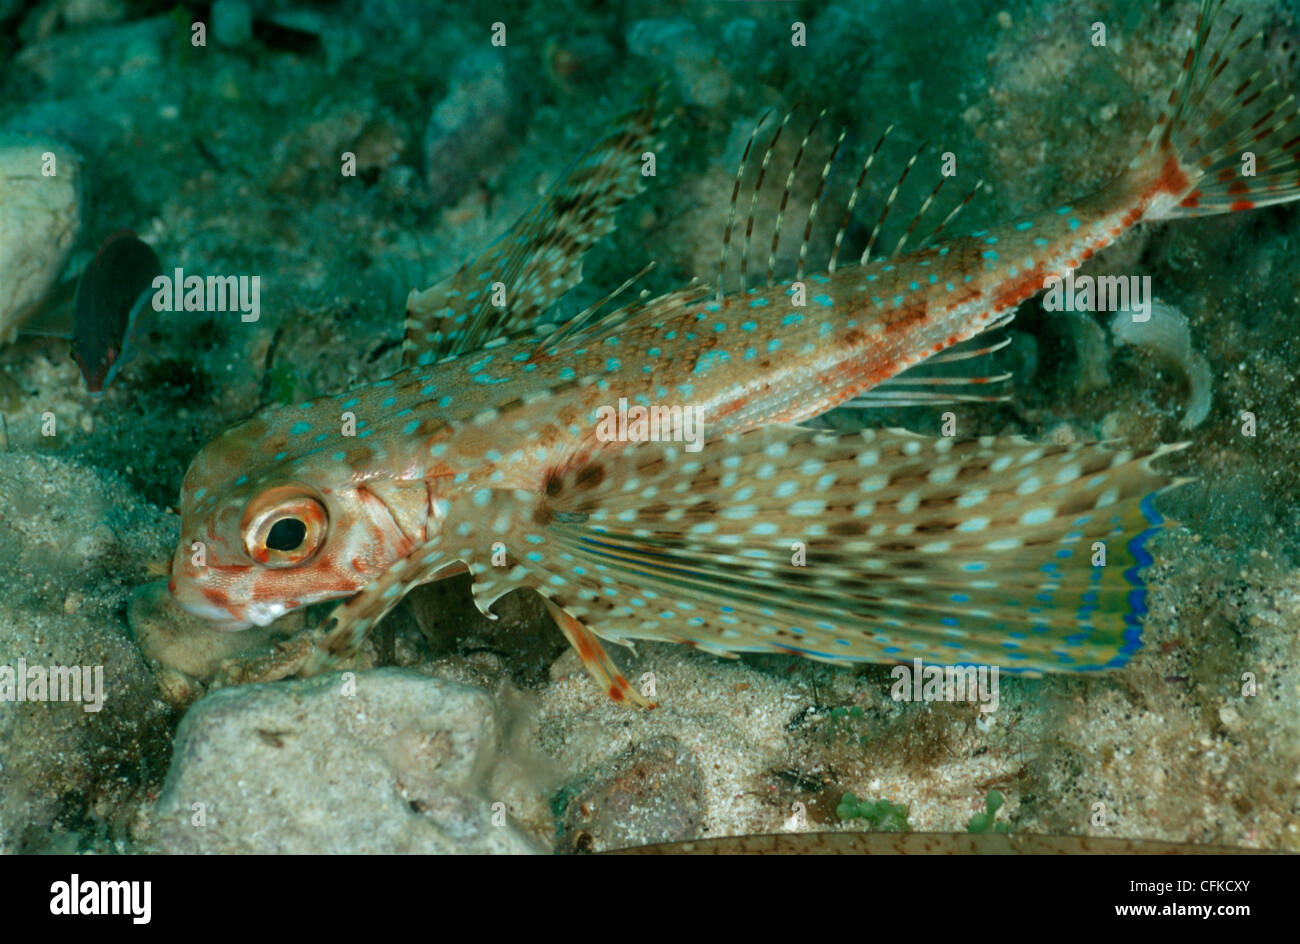 Flying gurnard fish, Dactylopterus volitans, photographed in the Mediterranean Sea. Stock Photo